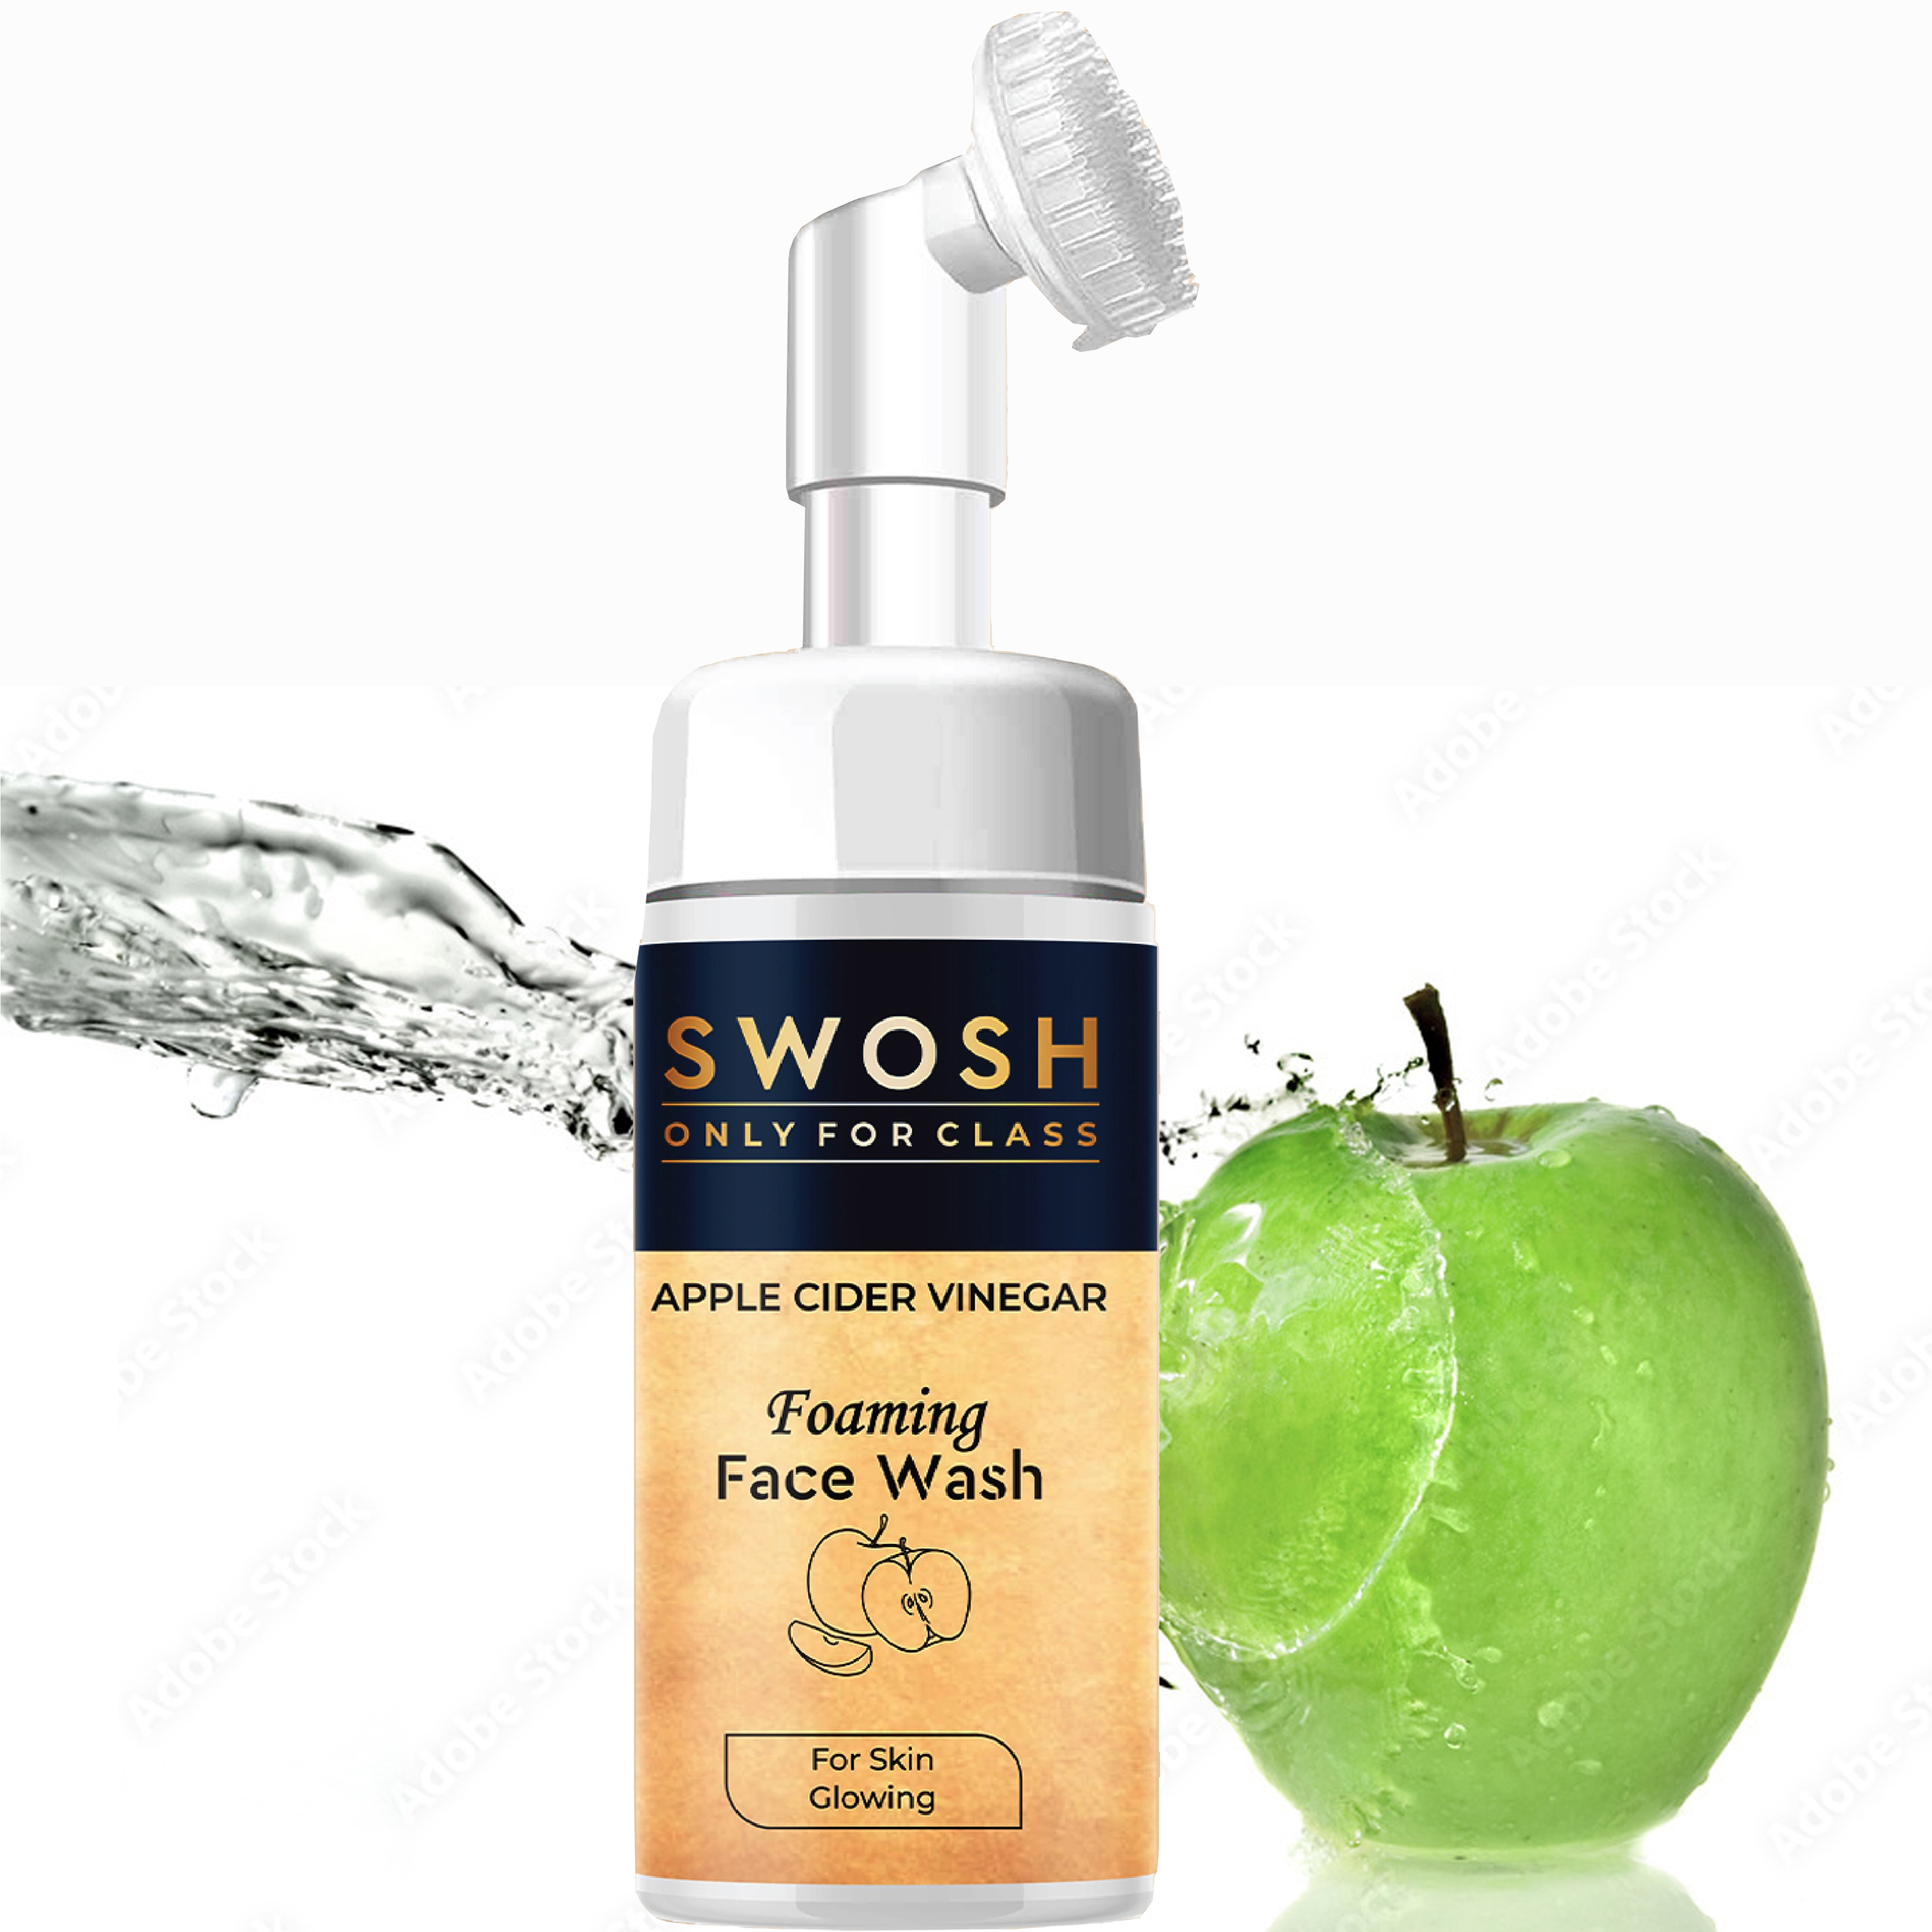 SWOSH | SWOSH Apple Cider vinegar (Apple extract) Foaming Face Wash for Acne Prone & Oily Skin - No Parabens, Sulphate, Silicones & Colour (with Built-in Face Brush), 100 ml